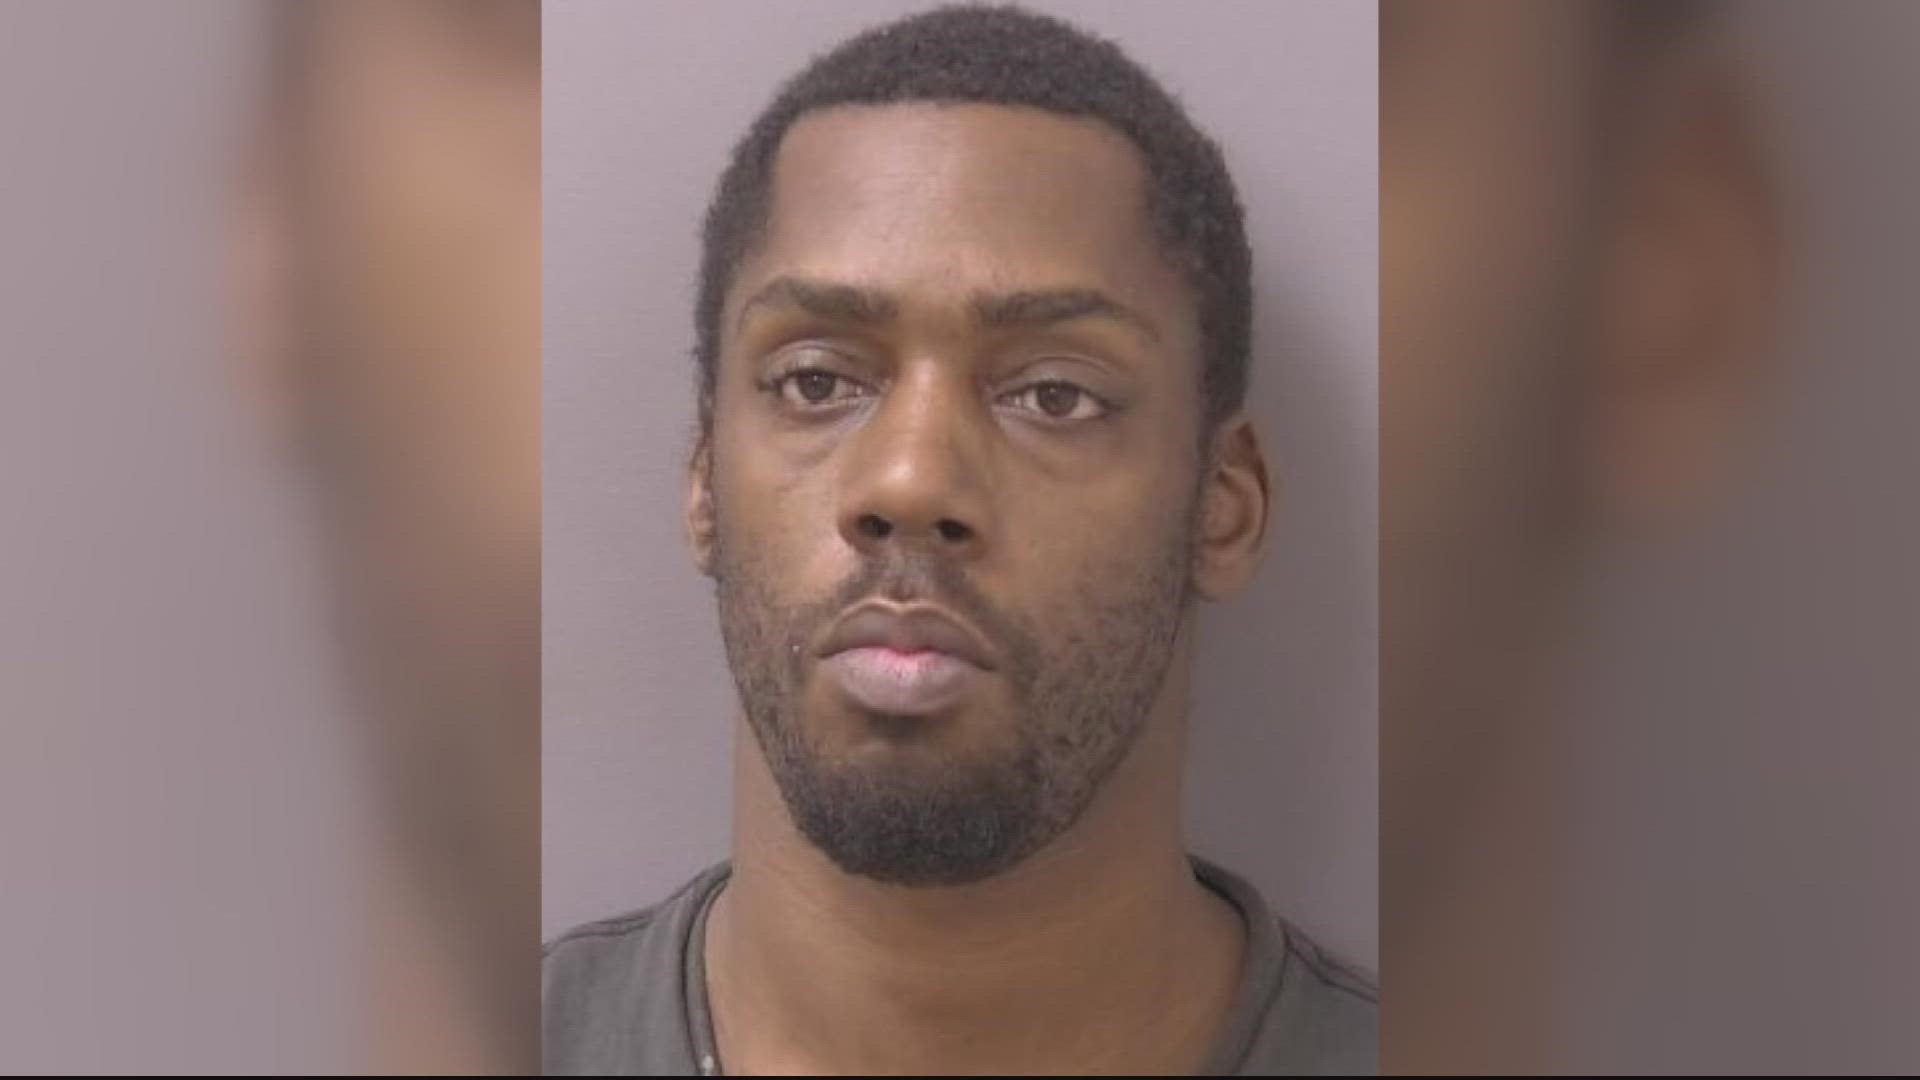 Anthony Robinson, 35, is accused of killing five women in the DMV region.